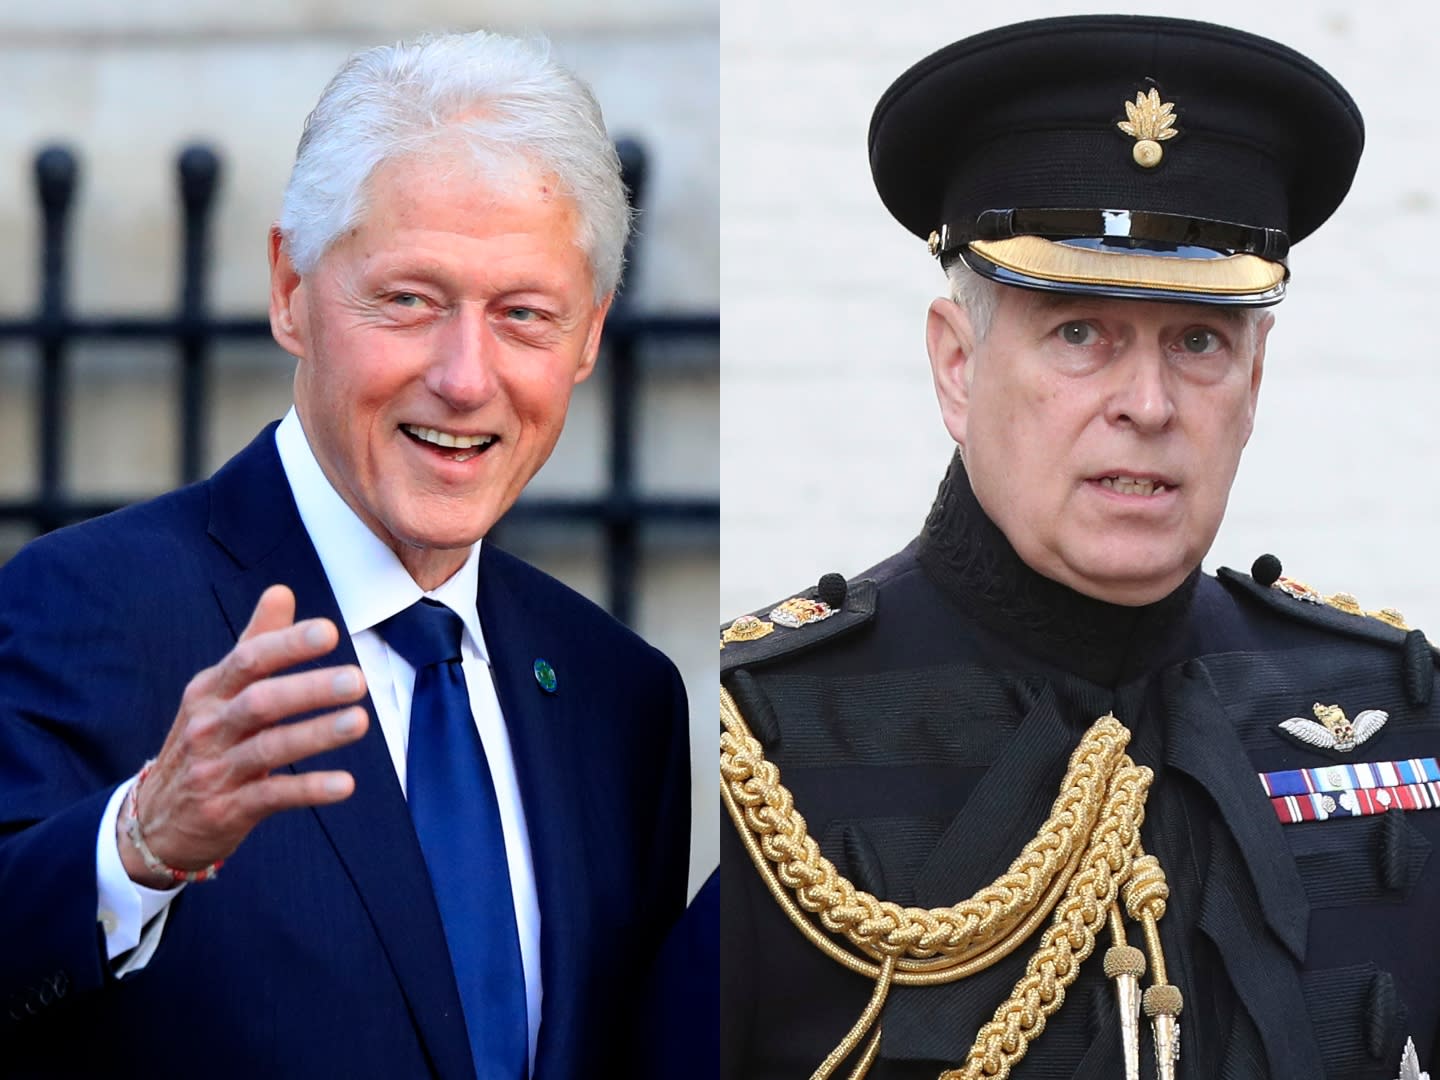 Bill Clinton Prince Andrew Could Be Facing New Trouble Over Jeffrey Epstein S Flight Logs